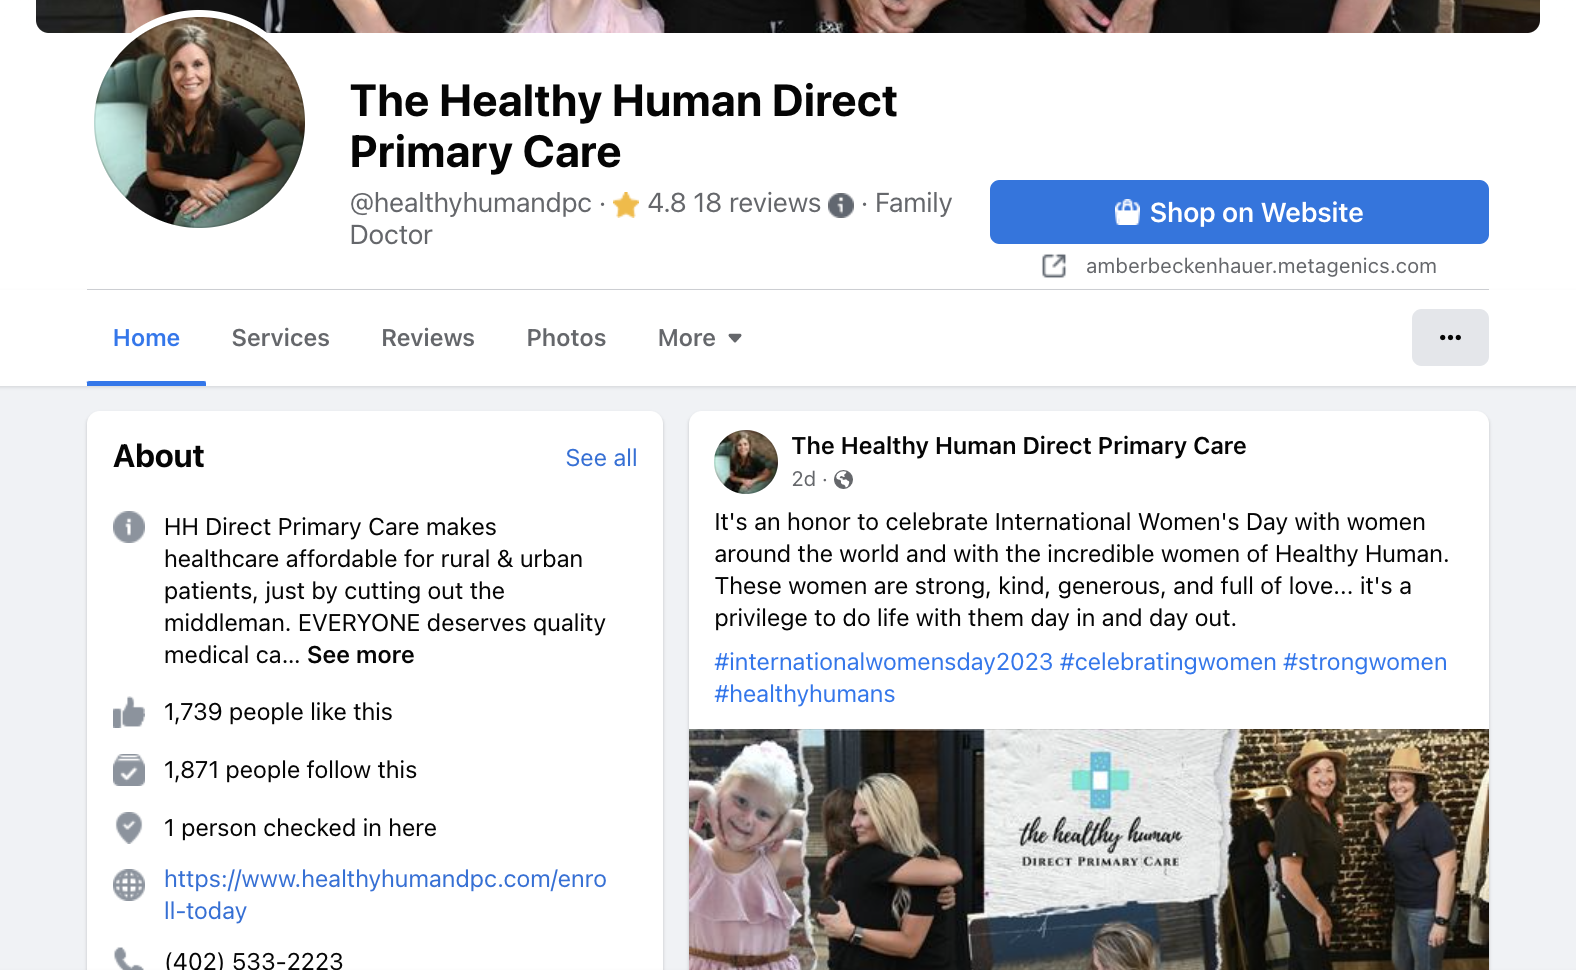 The Healthy Human Direct Primary Care Facebook